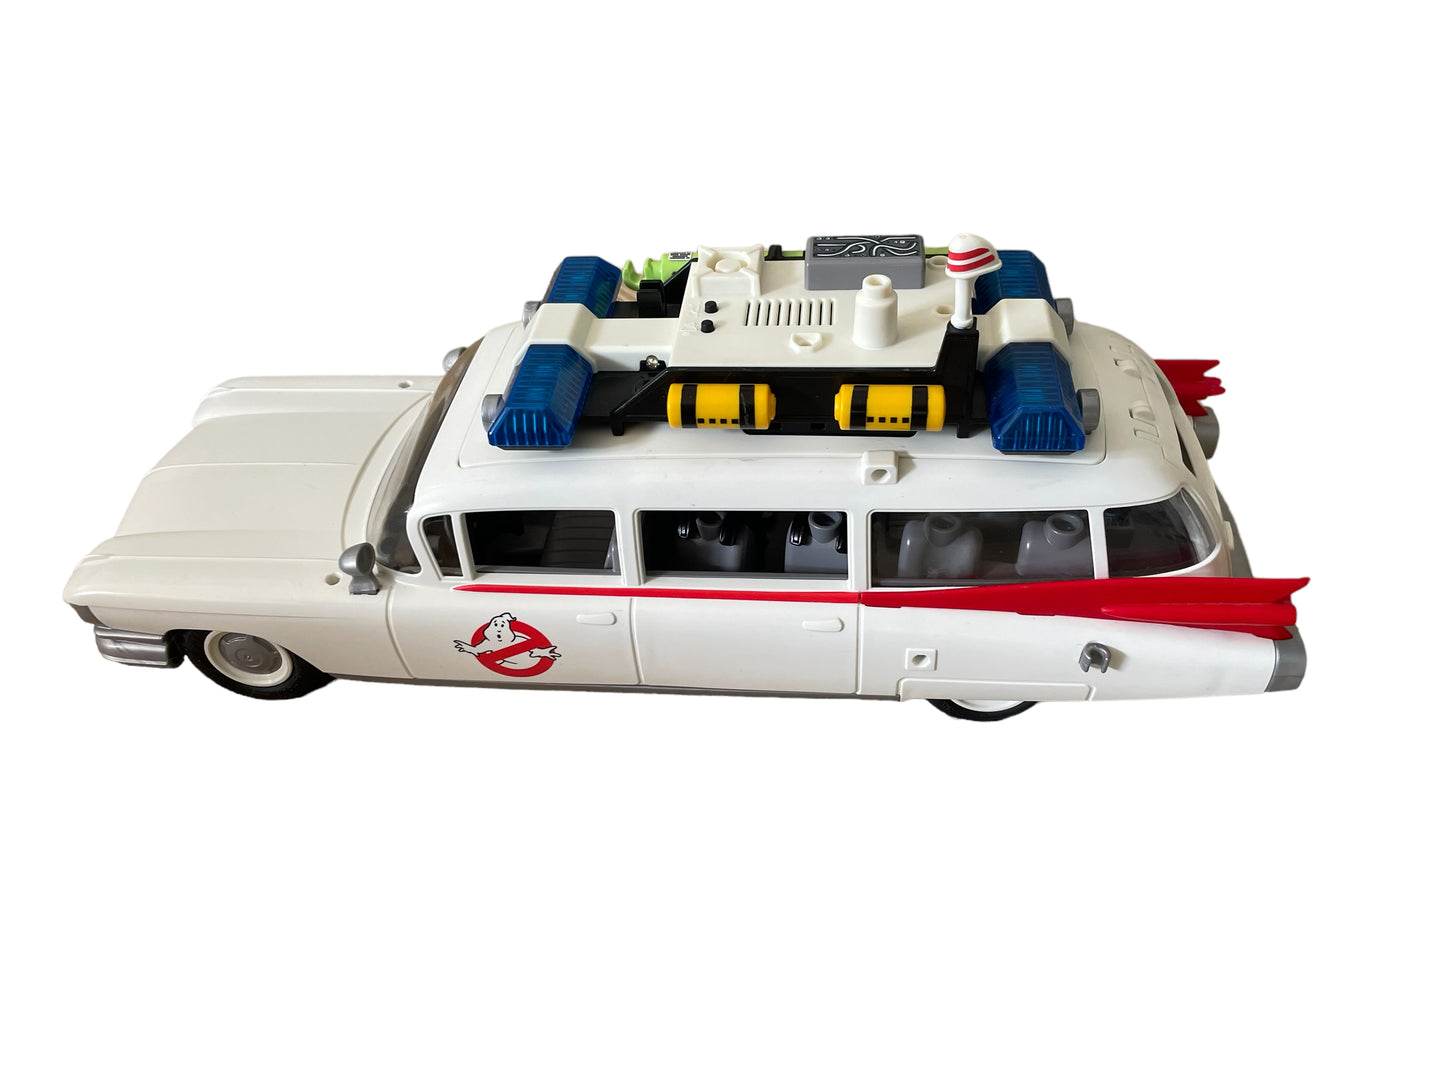 3 in 1 Ghostbusers Playmobil Set including: Ghostbusters Fire Station, Ghostbusters Squad Car and Stay Puft Mashmallow Man